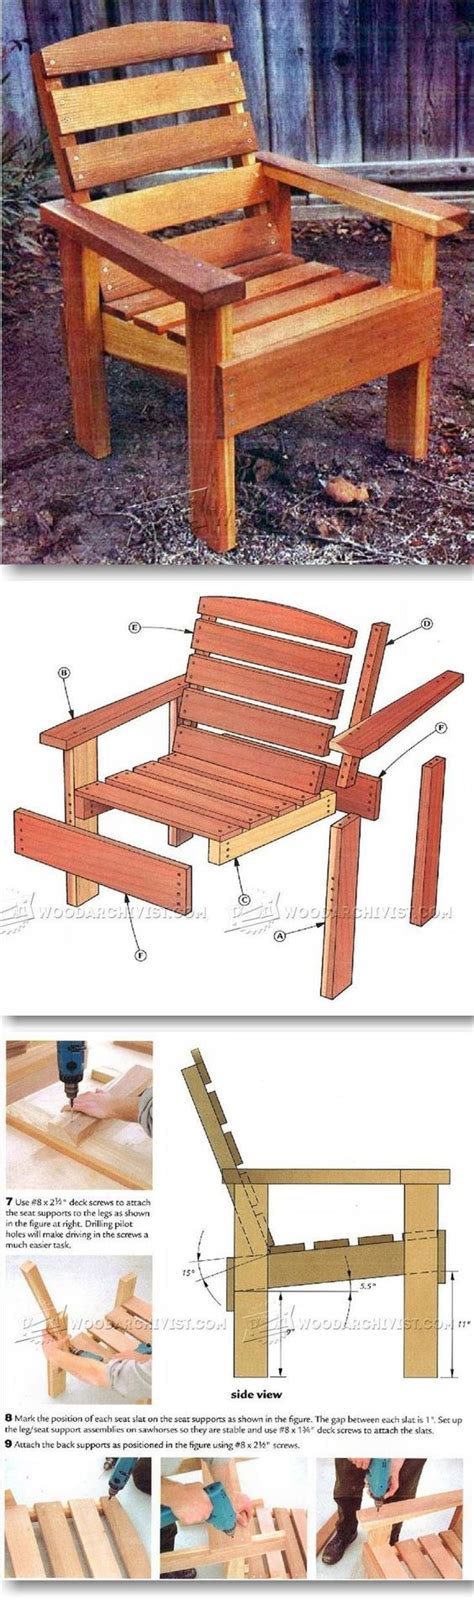 Diy Deck Chair Free Plans A Beginners Guide To Building The Perfect